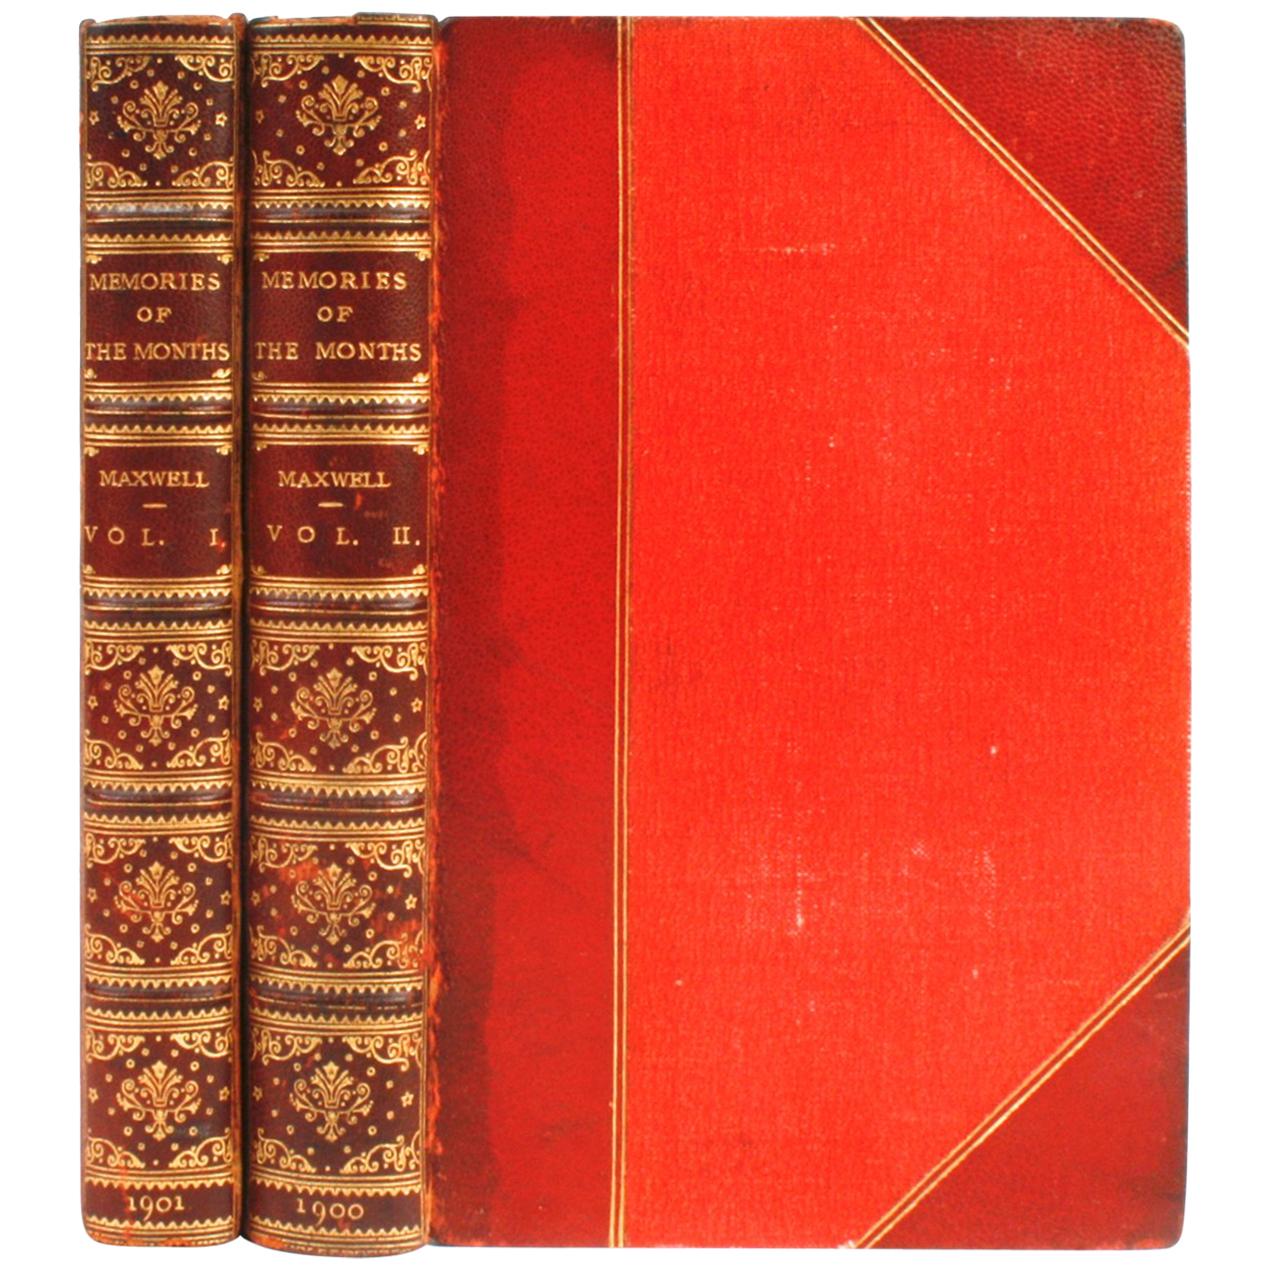 Memories of the Months by Sir Herbert Maxwell in Two Volumes, 1900-1901